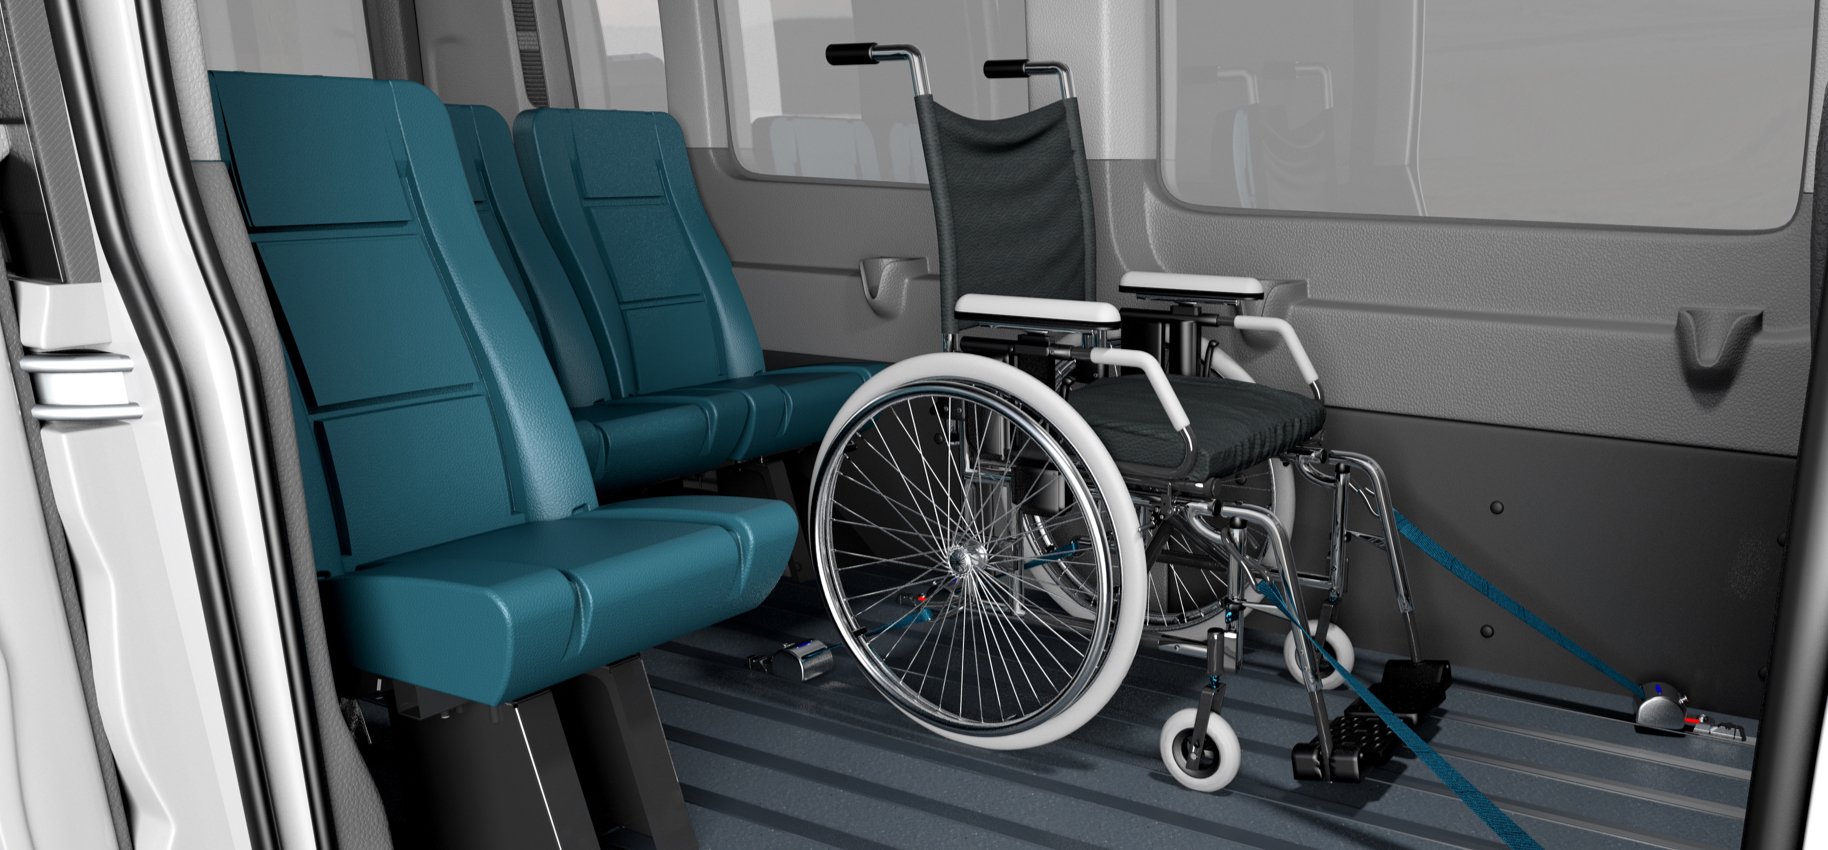 A wheel chair installed in front of blue seats on an ALFO flooring system inside of a van